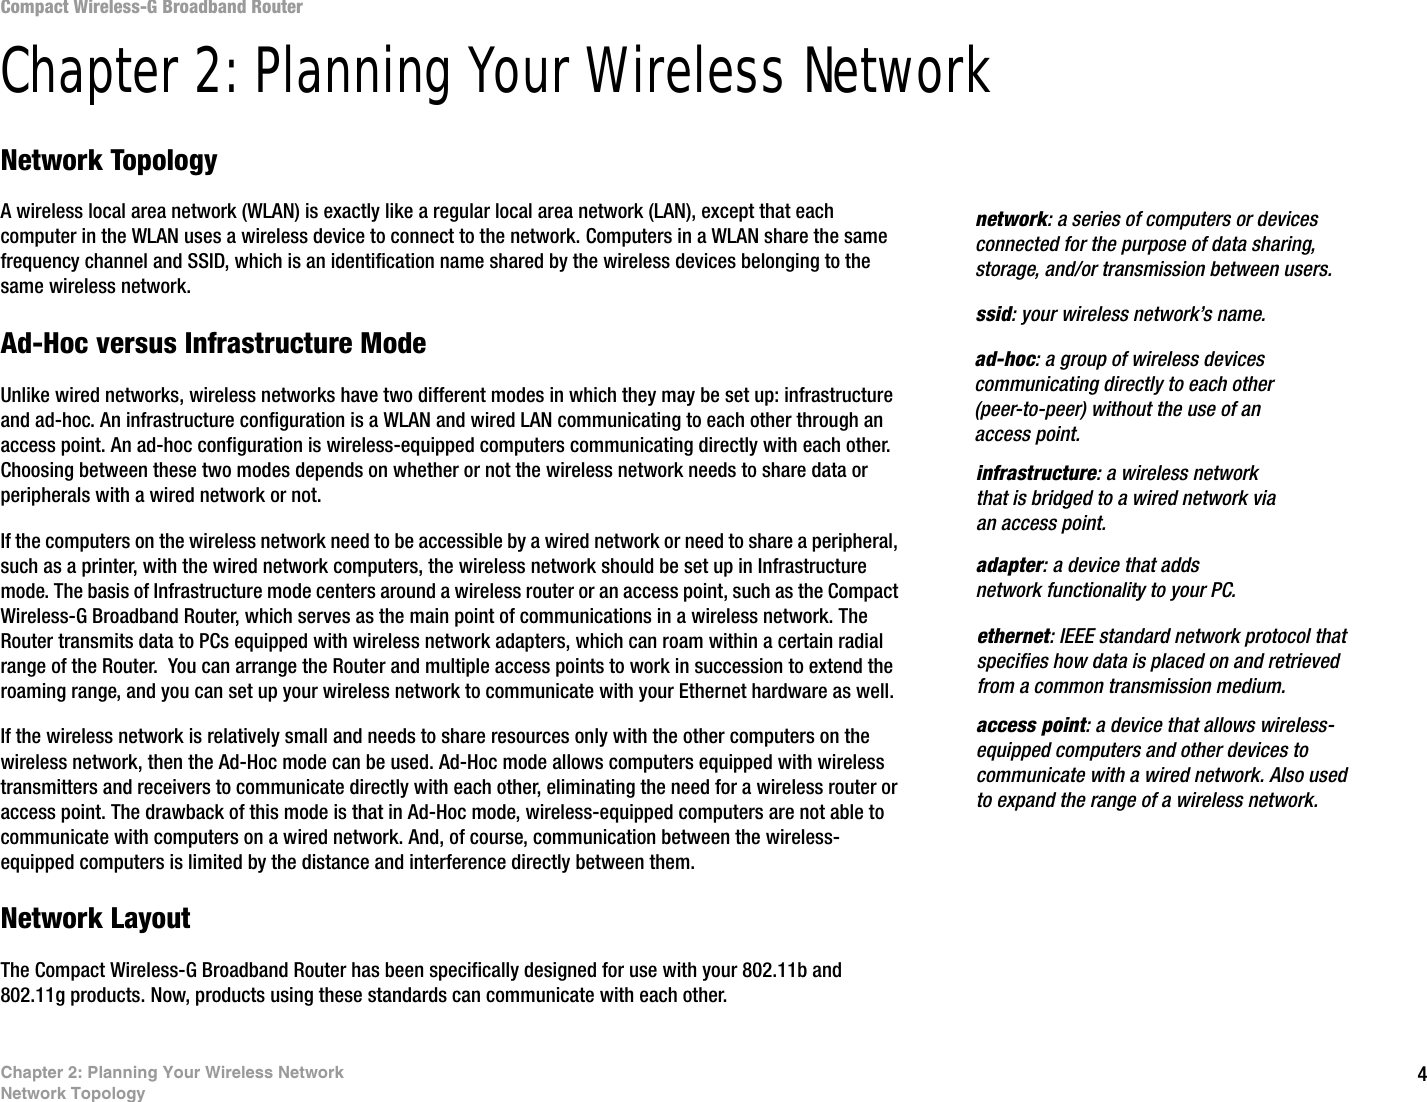 4Chapter 2: Planning Your Wireless NetworkNetwork TopologyCompact Wireless-G Broadband RouterChapter 2: Planning Your Wireless NetworkNetwork TopologyA wireless local area network (WLAN) is exactly like a regular local area network (LAN), except that each computer in the WLAN uses a wireless device to connect to the network. Computers in a WLAN share the same frequency channel and SSID, which is an identification name shared by the wireless devices belonging to the same wireless network.Ad-Hoc versus Infrastructure ModeUnlike wired networks, wireless networks have two different modes in which they may be set up: infrastructure and ad-hoc. An infrastructure configuration is a WLAN and wired LAN communicating to each other through an access point. An ad-hoc configuration is wireless-equipped computers communicating directly with each other. Choosing between these two modes depends on whether or not the wireless network needs to share data or peripherals with a wired network or not. If the computers on the wireless network need to be accessible by a wired network or need to share a peripheral, such as a printer, with the wired network computers, the wireless network should be set up in Infrastructure mode. The basis of Infrastructure mode centers around a wireless router or an access point, such as the Compact Wireless-G Broadband Router, which serves as the main point of communications in a wireless network. The Router transmits data to PCs equipped with wireless network adapters, which can roam within a certain radial range of the Router.  You can arrange the Router and multiple access points to work in succession to extend the roaming range, and you can set up your wireless network to communicate with your Ethernet hardware as well. If the wireless network is relatively small and needs to share resources only with the other computers on the wireless network, then the Ad-Hoc mode can be used. Ad-Hoc mode allows computers equipped with wireless transmitters and receivers to communicate directly with each other, eliminating the need for a wireless router or access point. The drawback of this mode is that in Ad-Hoc mode, wireless-equipped computers are not able to communicate with computers on a wired network. And, of course, communication between the wireless-equipped computers is limited by the distance and interference directly between them. Network LayoutThe Compact Wireless-G Broadband Router has been specifically designed for use with your 802.11b and 802.11g products. Now, products using these standards can communicate with each other.infrastructure: a wireless network that is bridged to a wired network via an access point.ssid: your wireless network’s name.ad-hoc: a group of wireless devices communicating directly to each other (peer-to-peer) without the use of an access point.access point: a device that allows wireless-equipped computers and other devices to communicate with a wired network. Also used to expand the range of a wireless network.adapter: a device that adds network functionality to your PC.ethernet: IEEE standard network protocol that specifies how data is placed on and retrieved from a common transmission medium.network: a series of computers or devices connected for the purpose of data sharing, storage, and/or transmission between users.